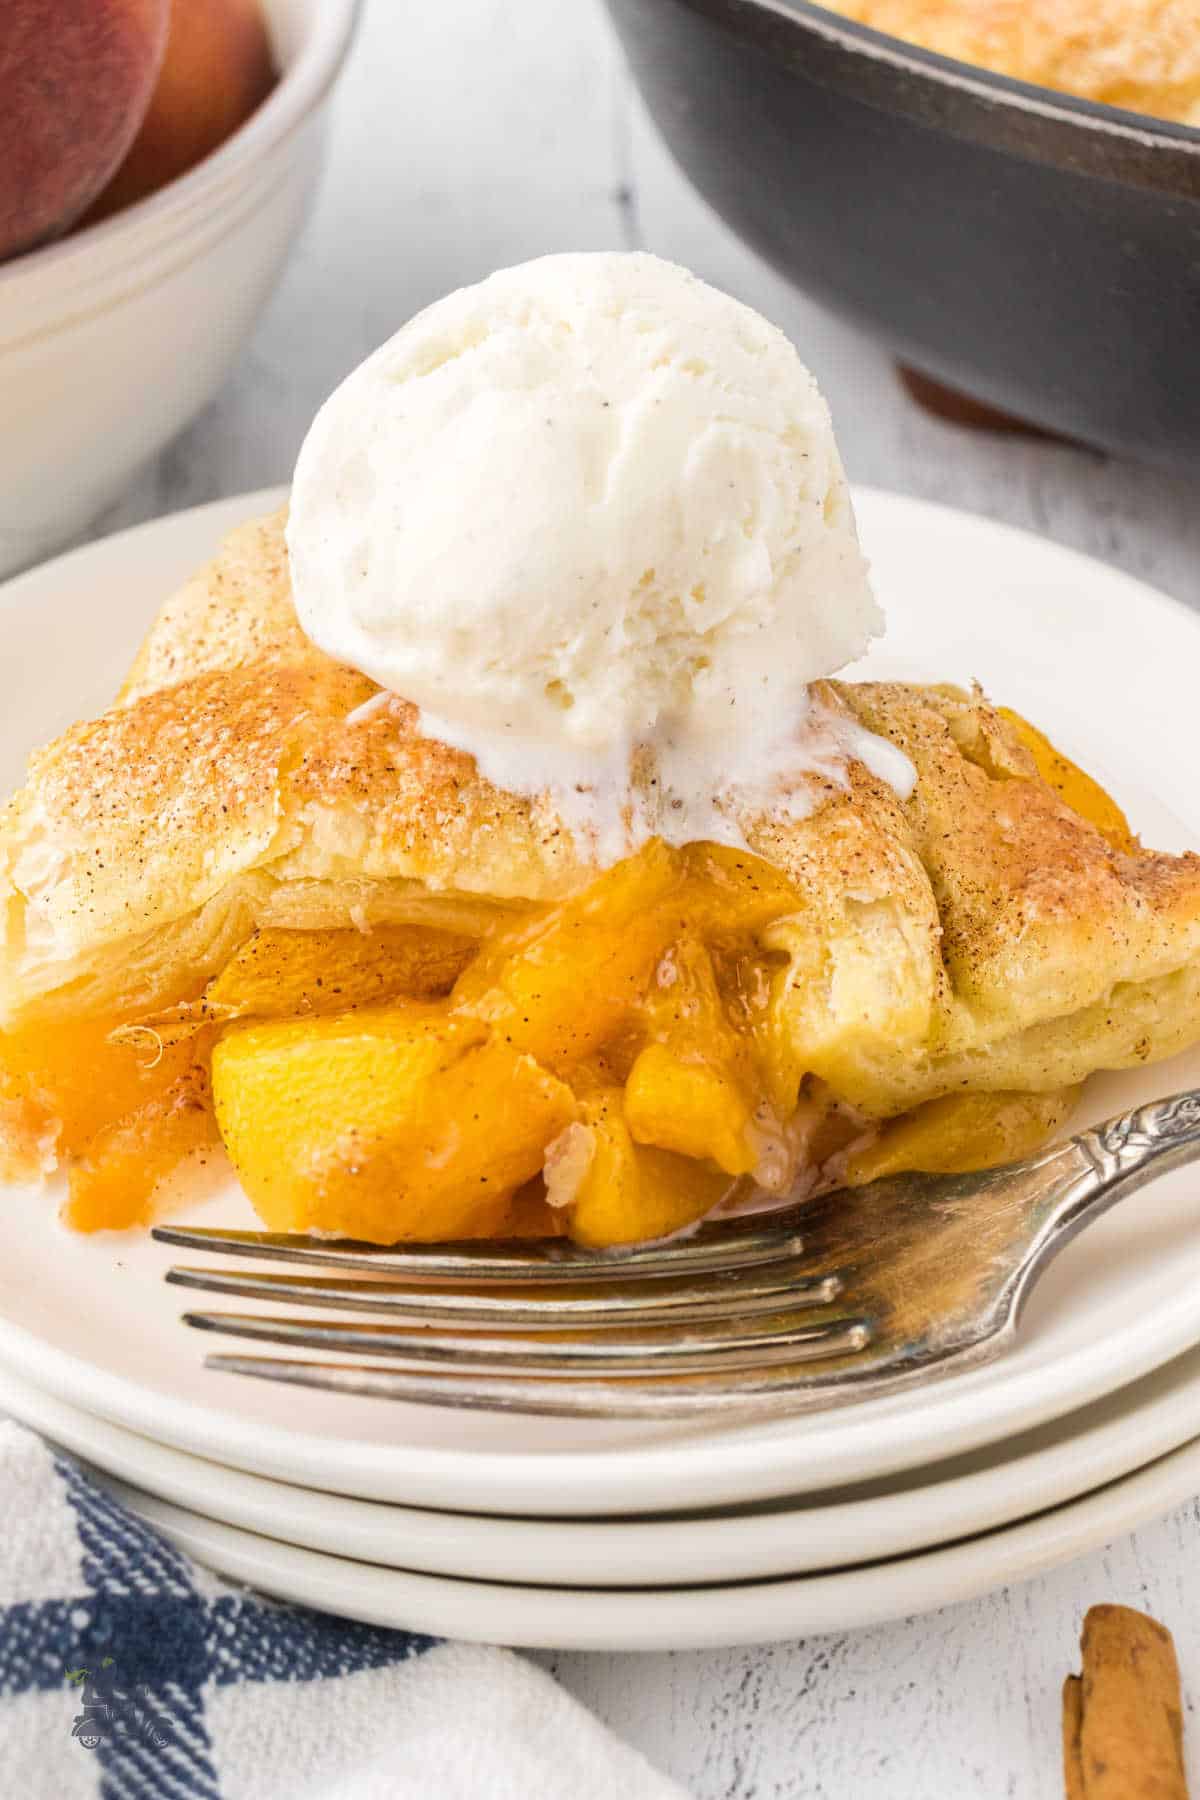 Baked peach dessert with pastry top and scoop of vanilla ice cream on top. 